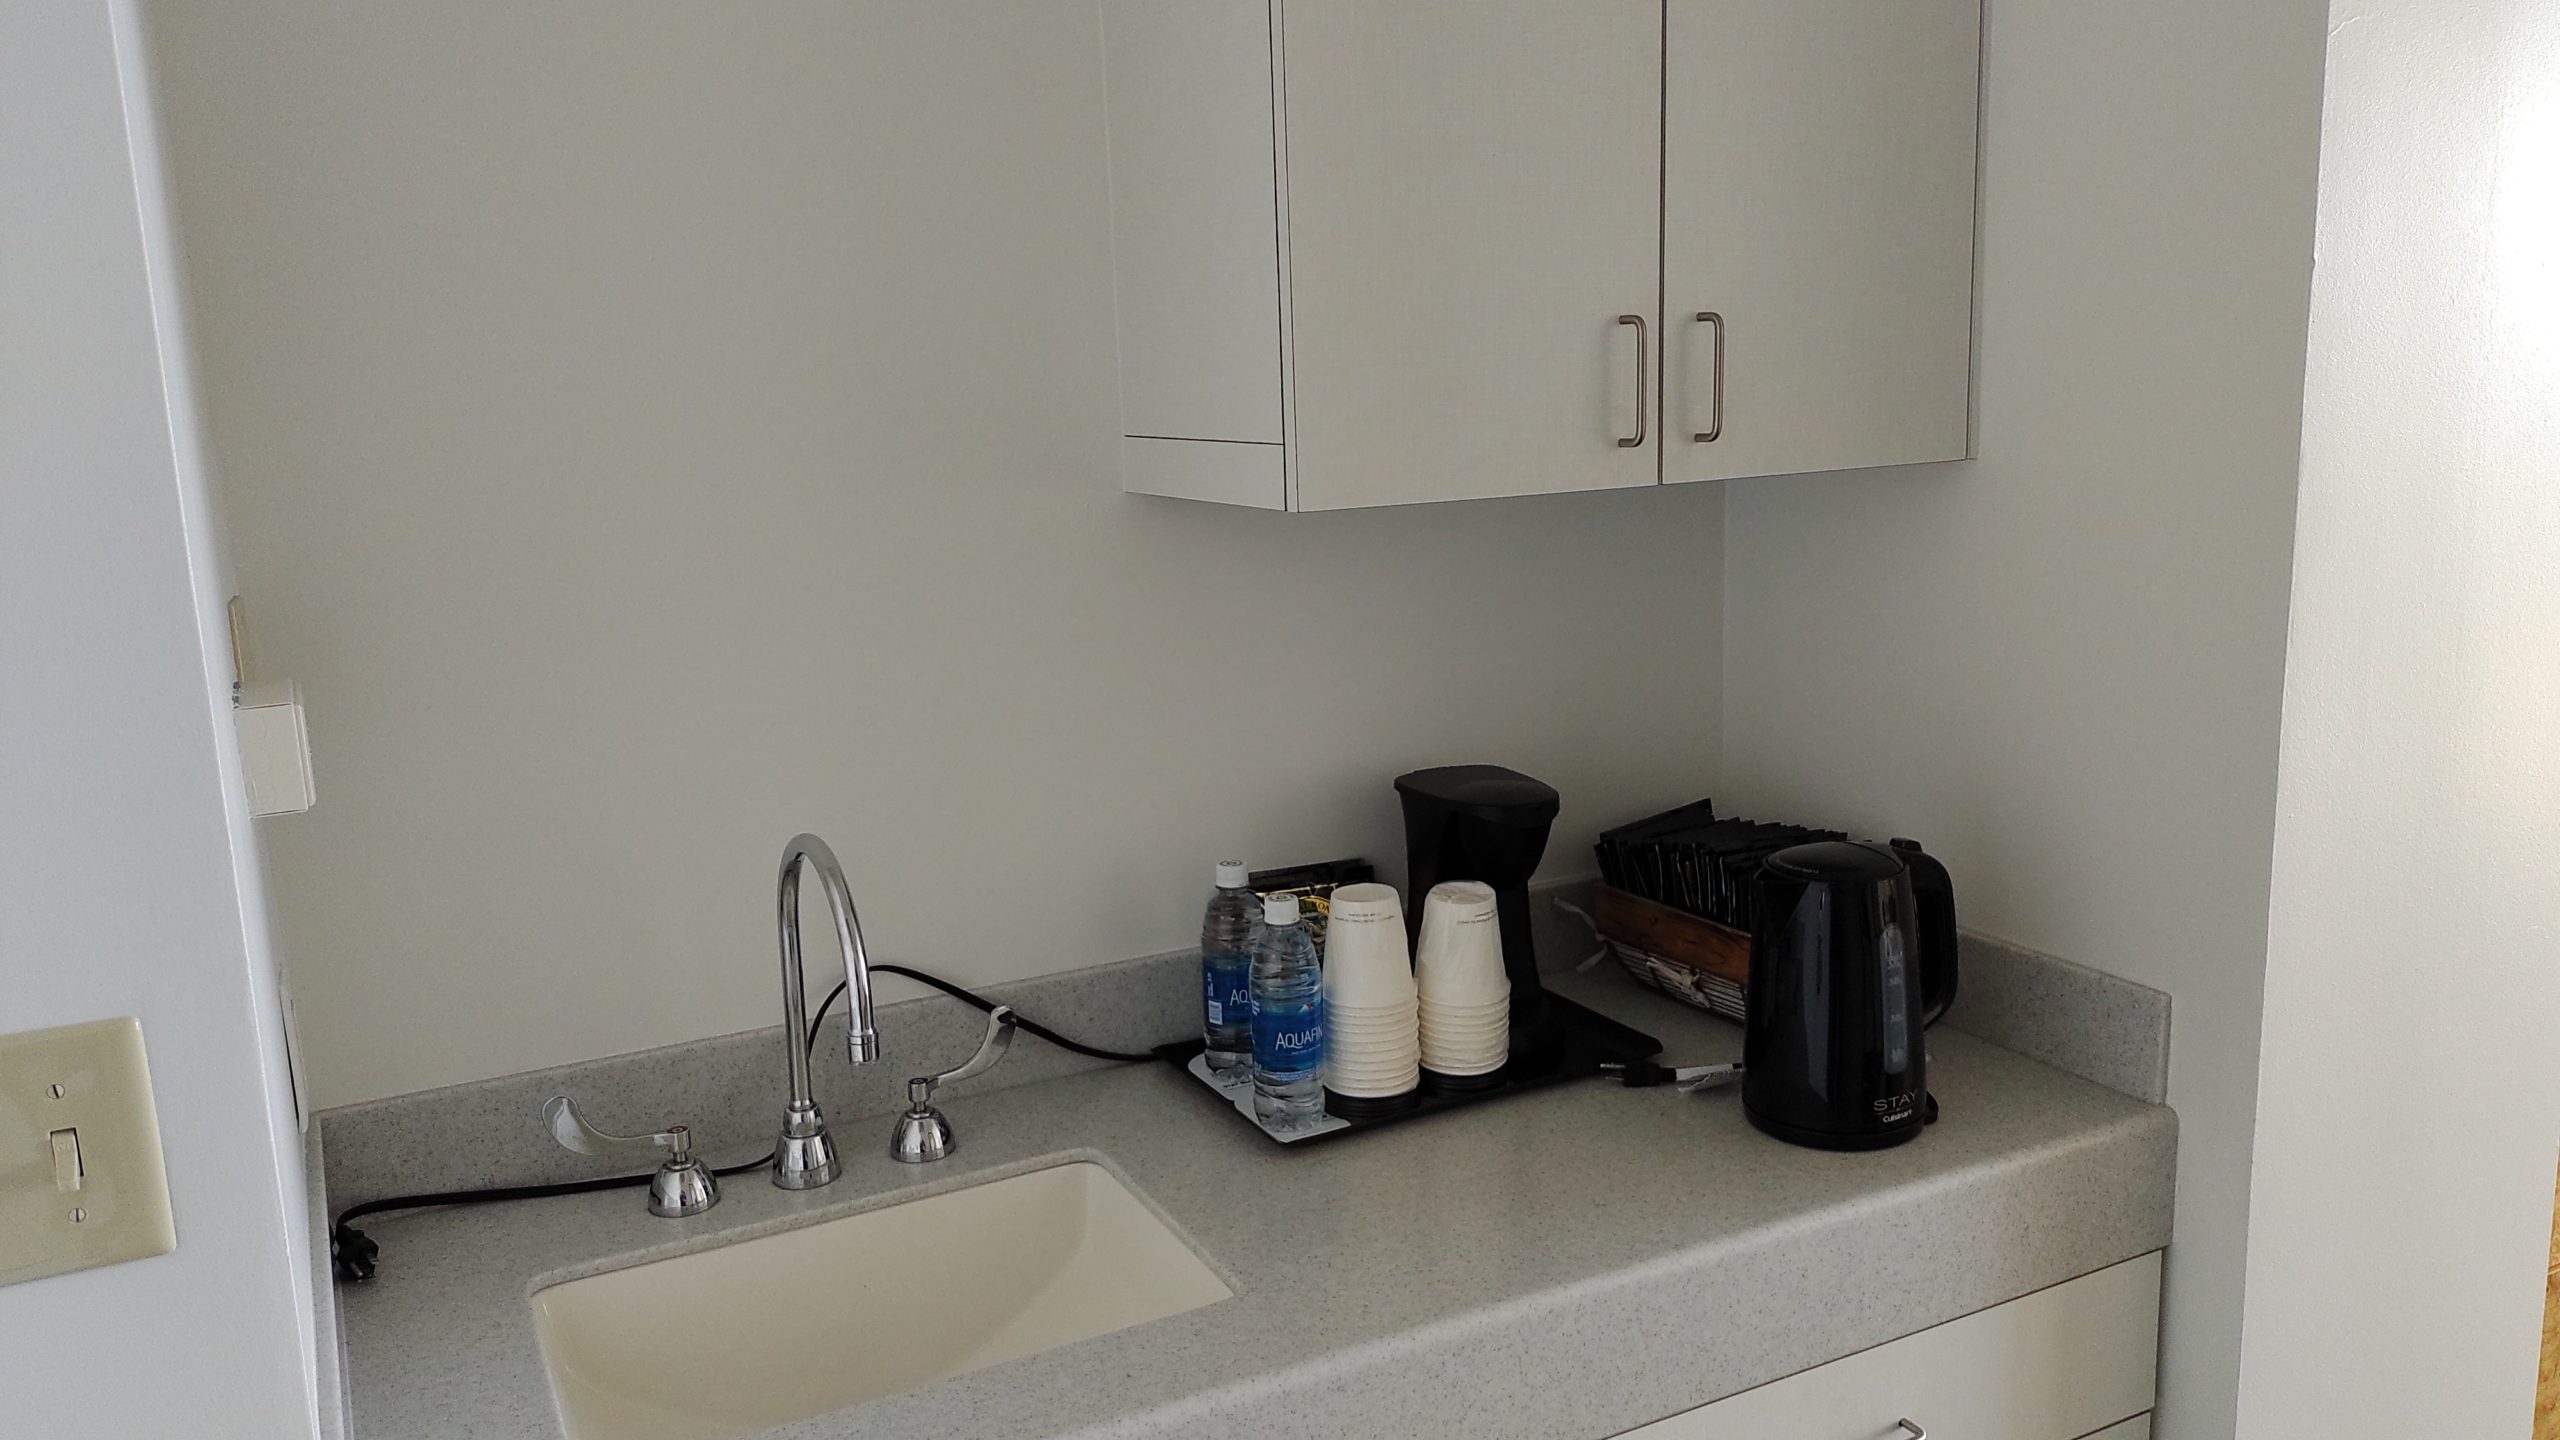 picture of the kitchenette at the entrance of the room.